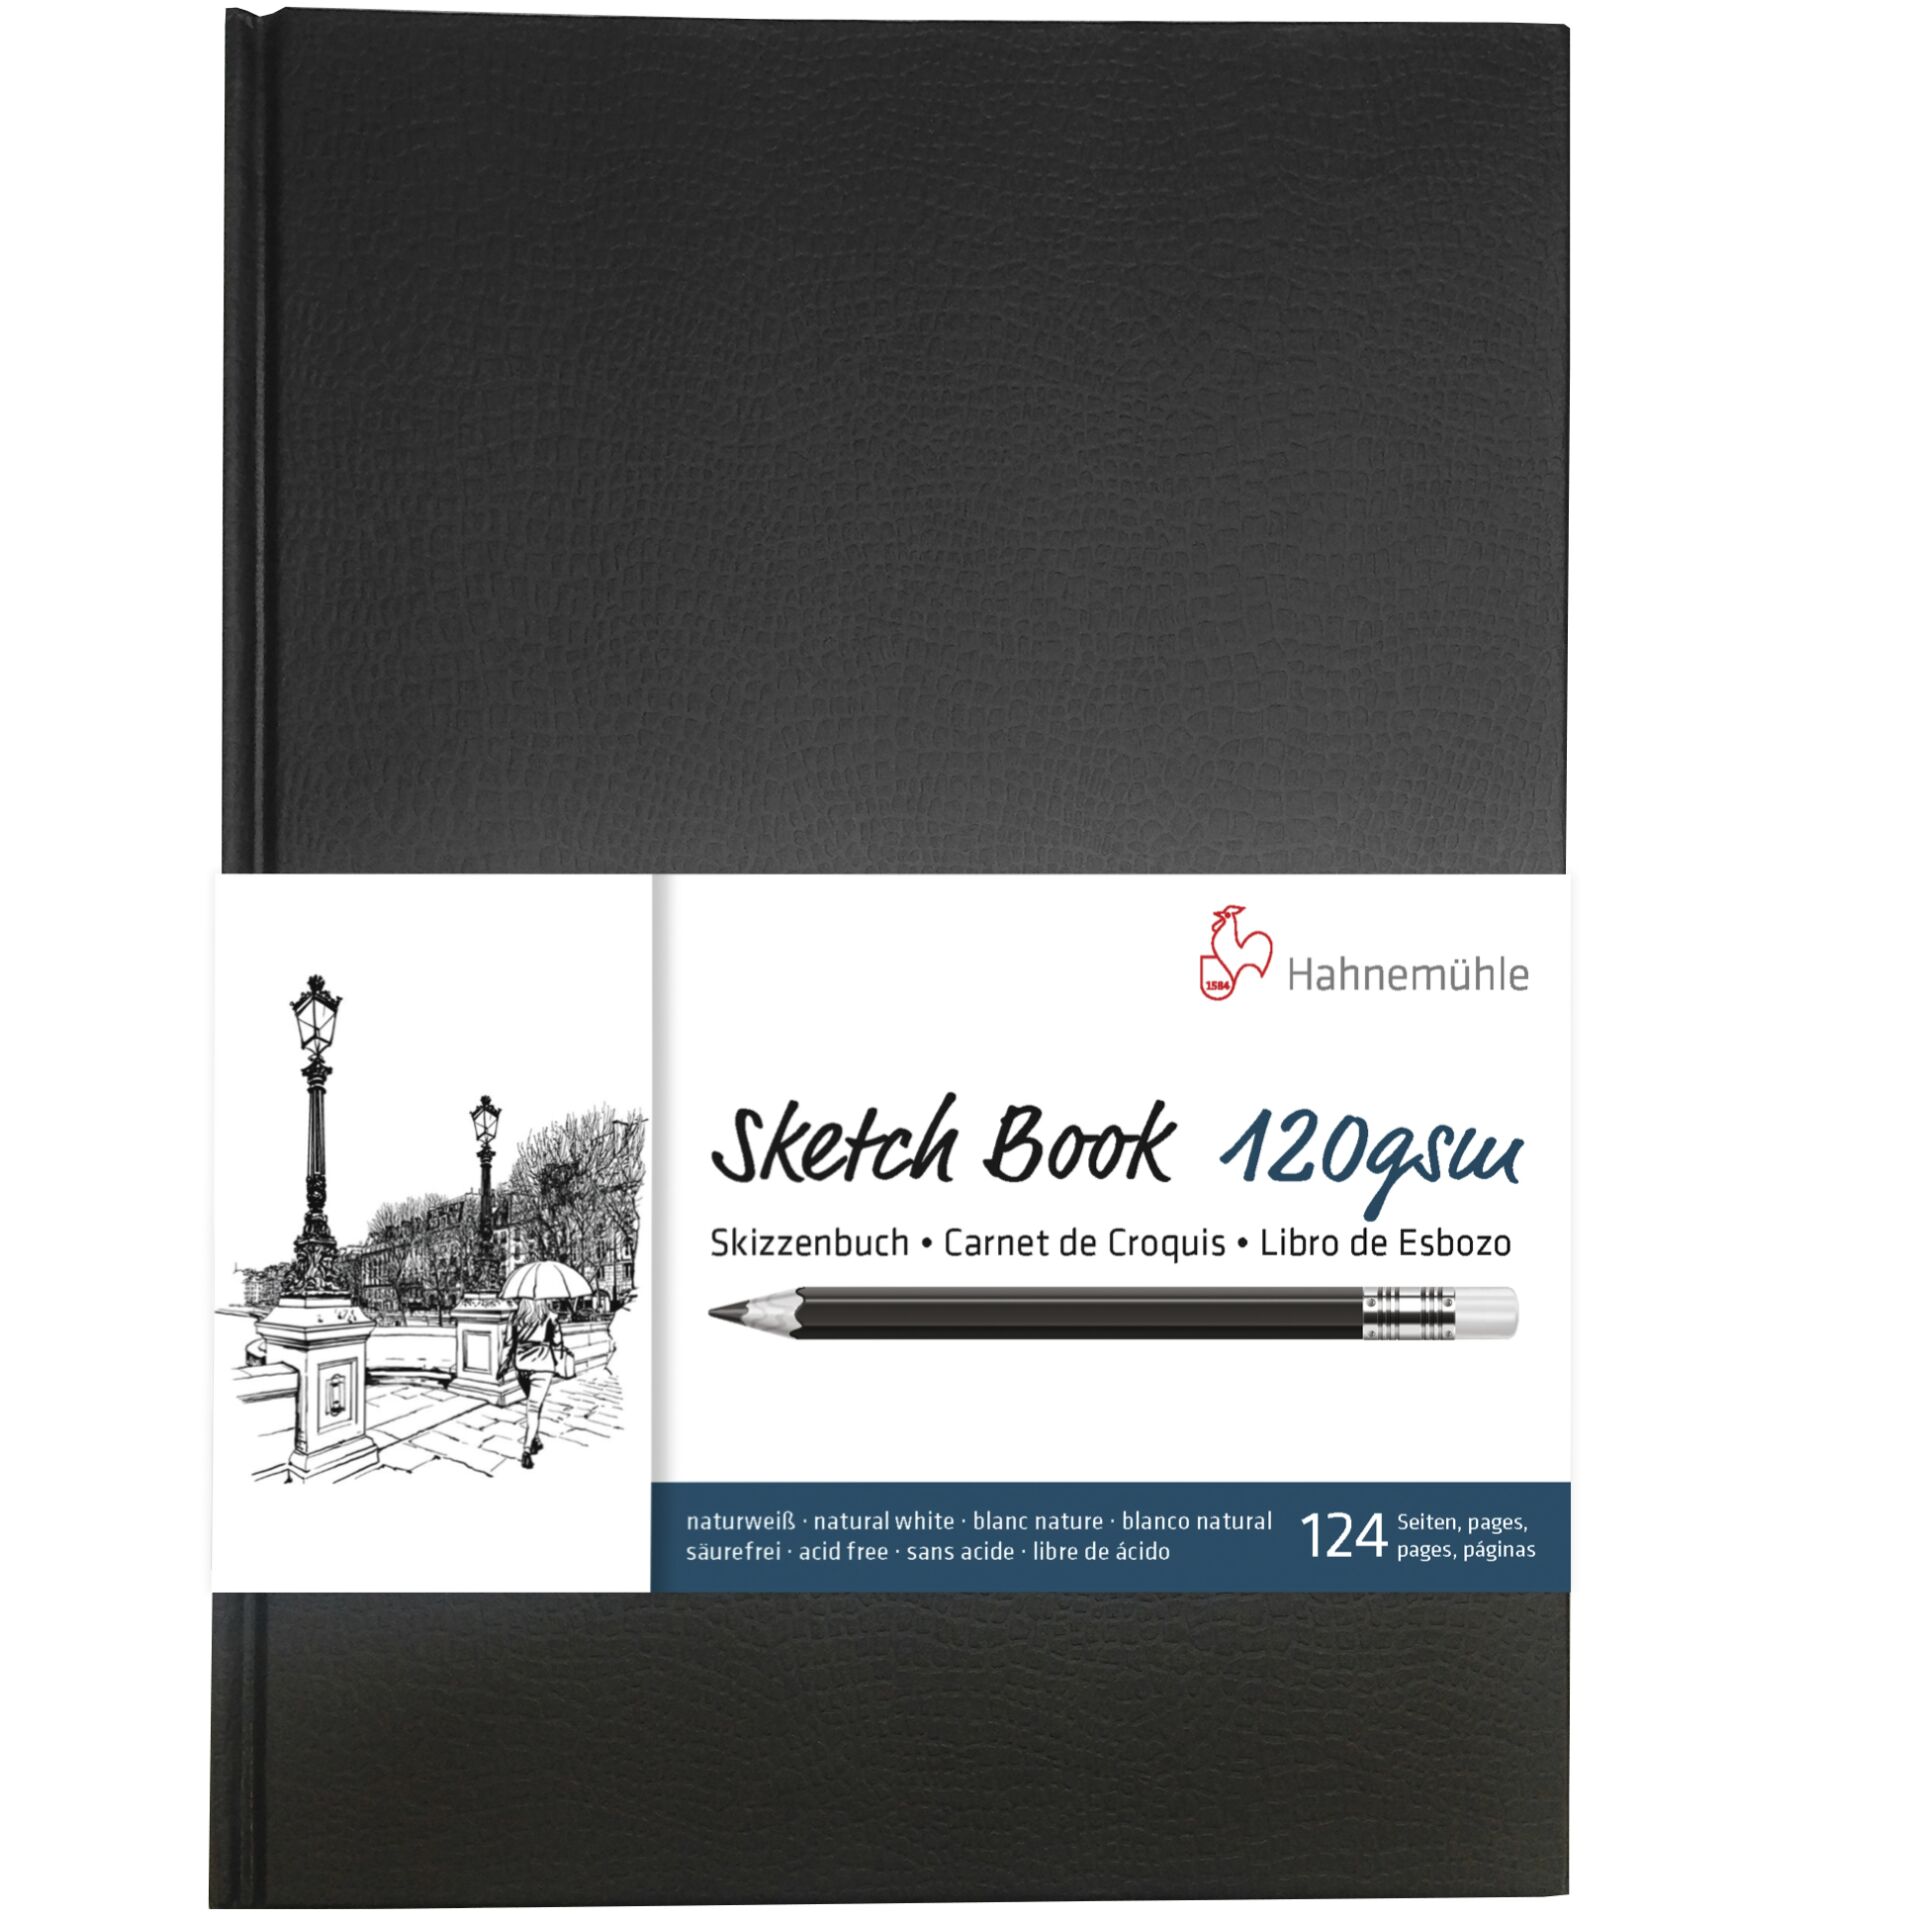 Hahnemühle Sketch Book A 3 62 Sheets 120 g